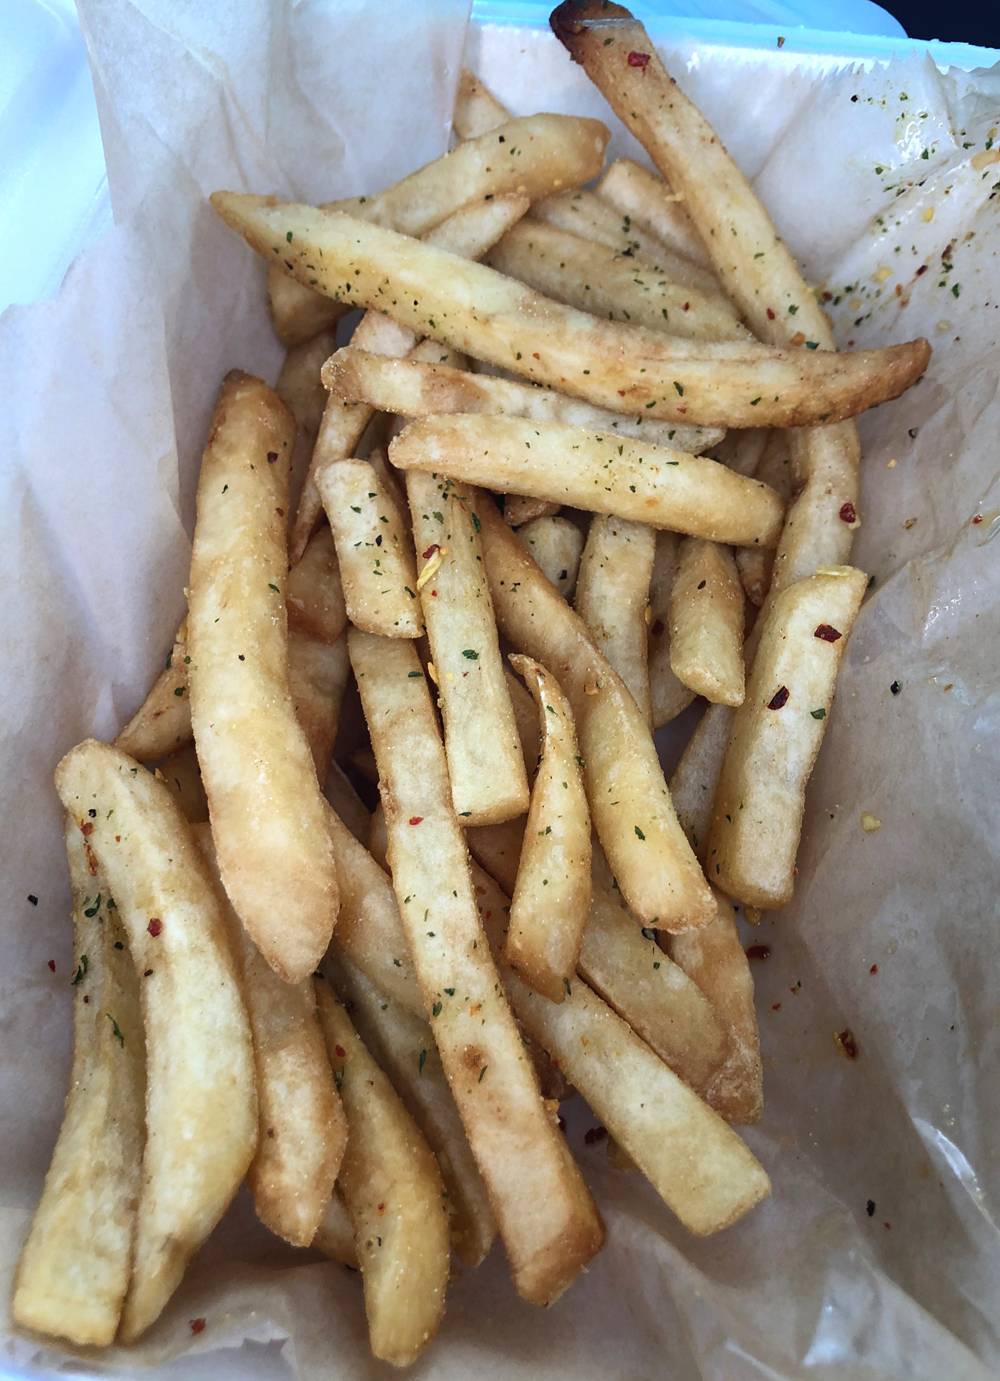 Straight French fries topped wiht a seasoning blend are served in a Styrofoam take out container. Photo by Jessica Hammie. 